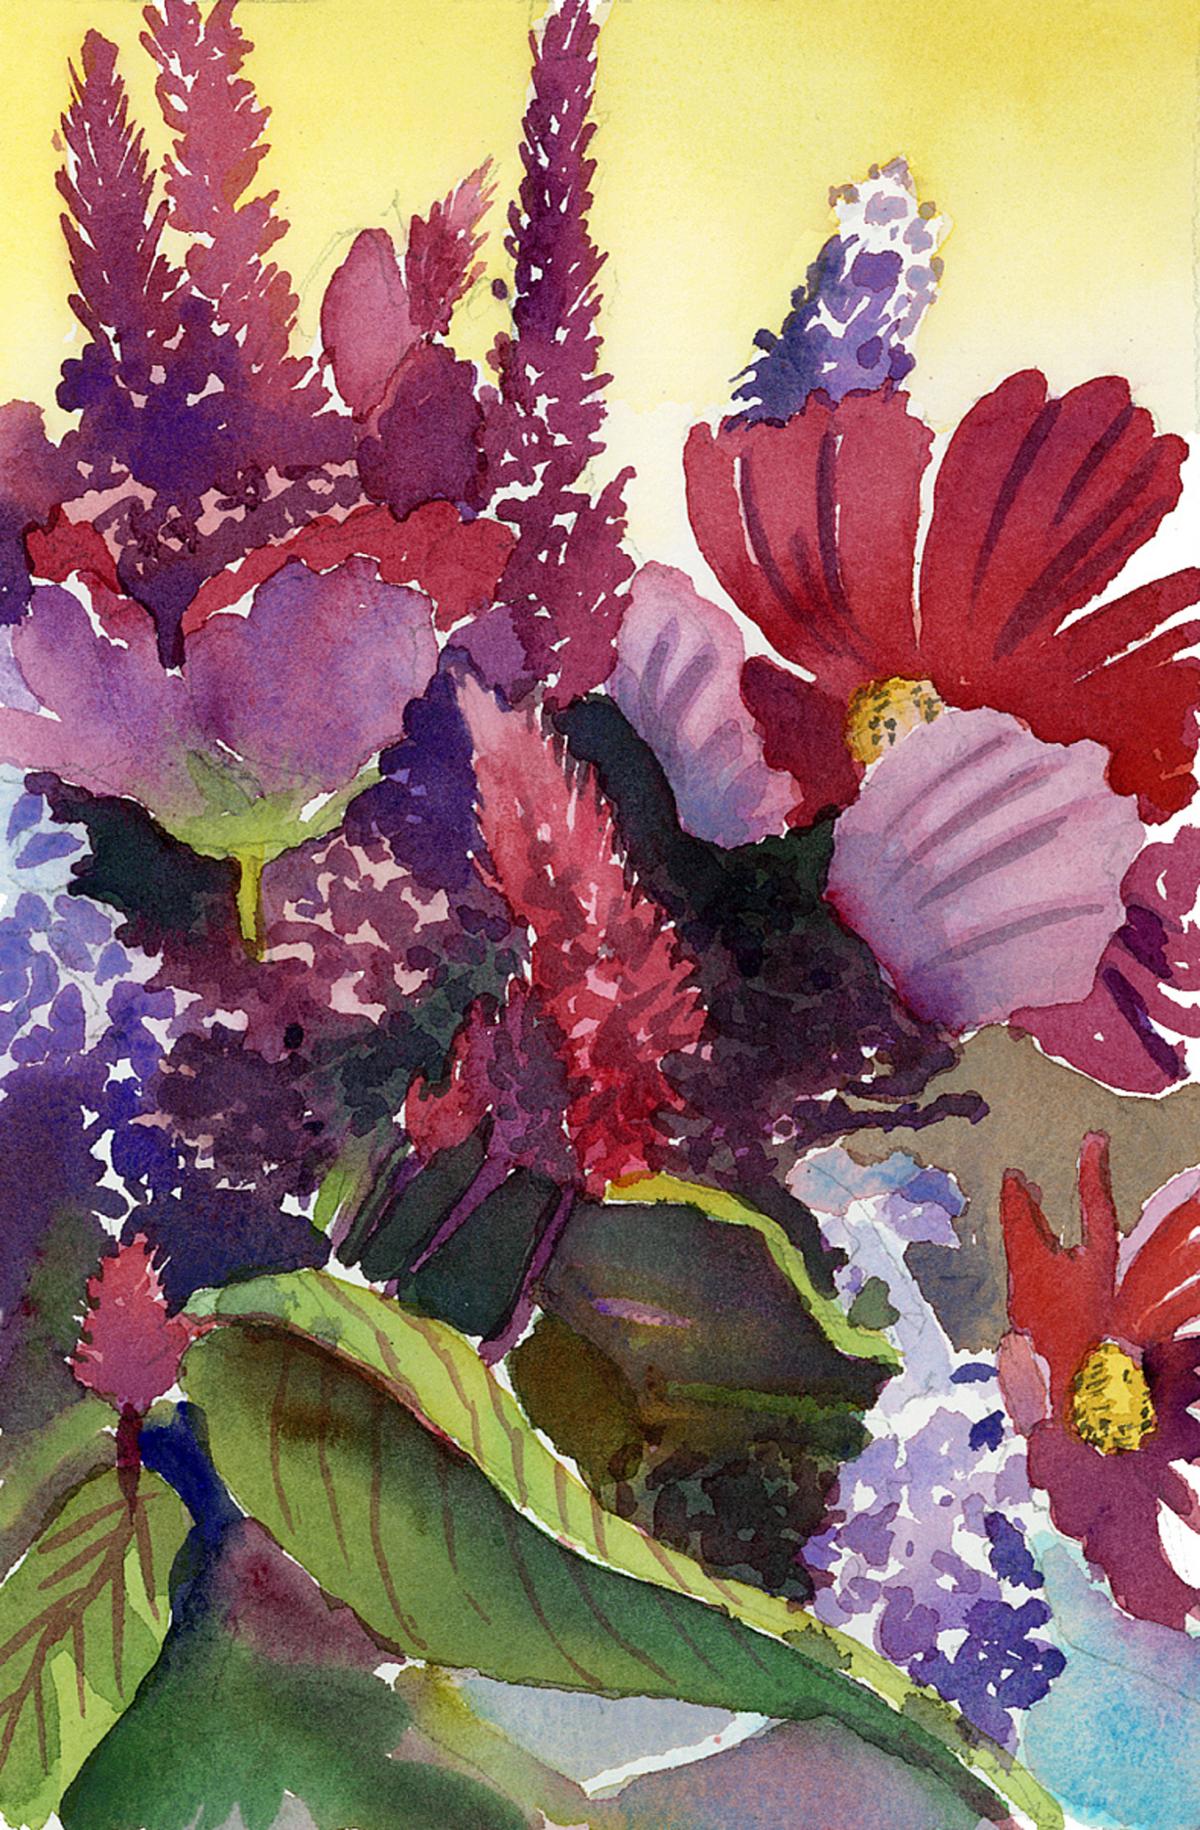 Nantucket Bouquet - watercolor floral painting by Frank Costantino